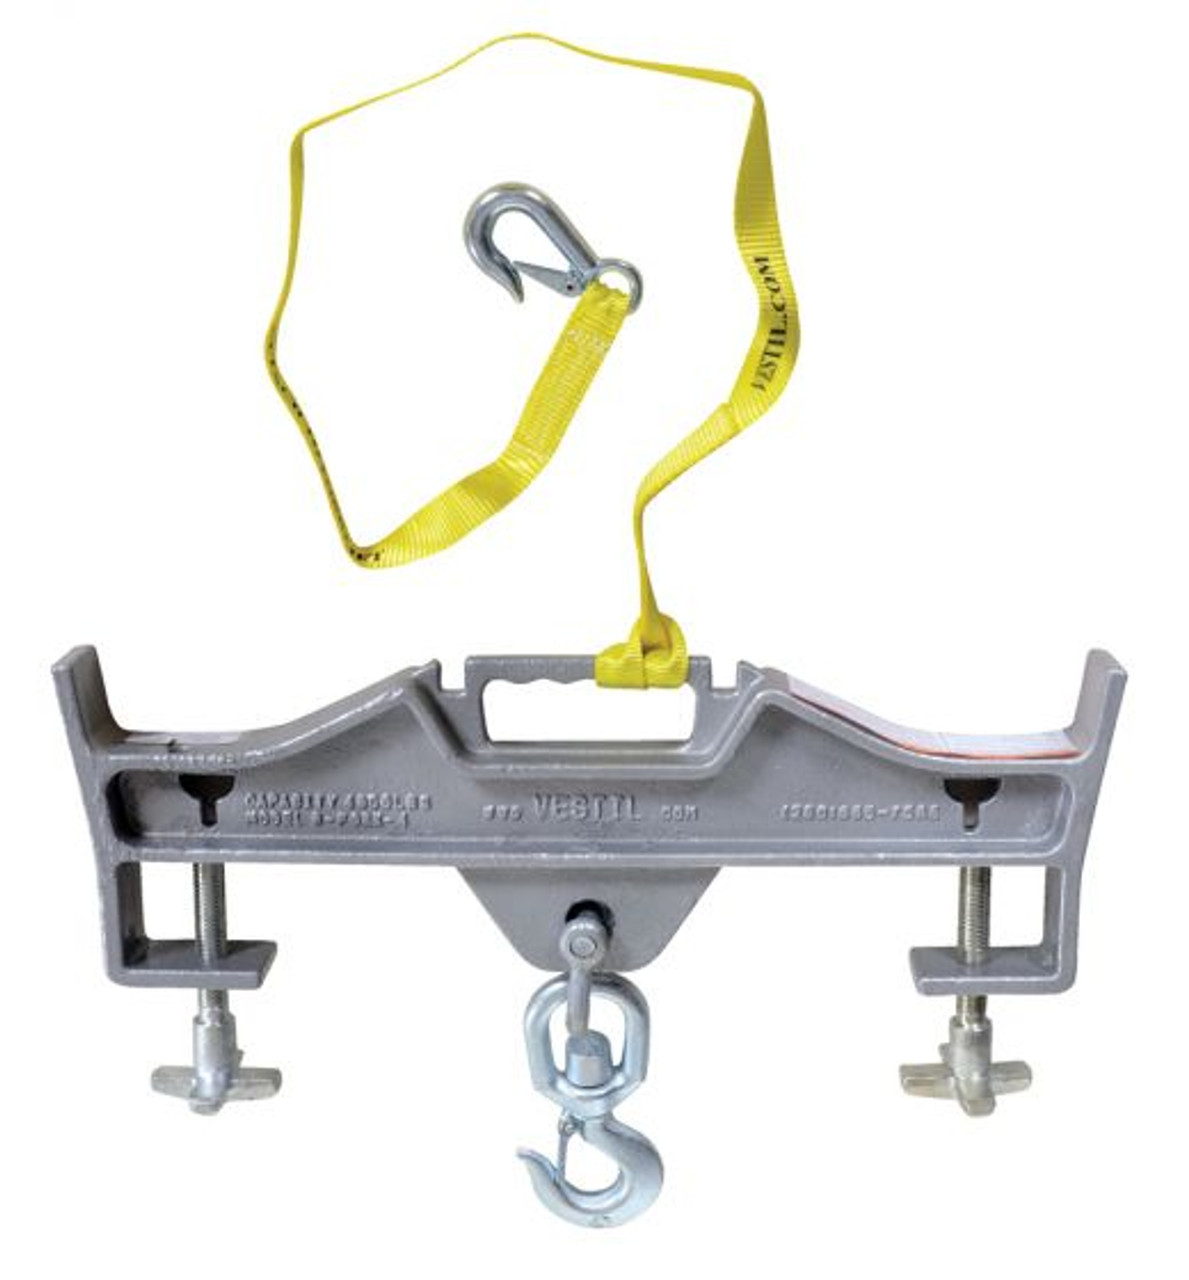 7 1/2 INCH HOISTING HOOK WITH DOUBLE FORK MOUNT